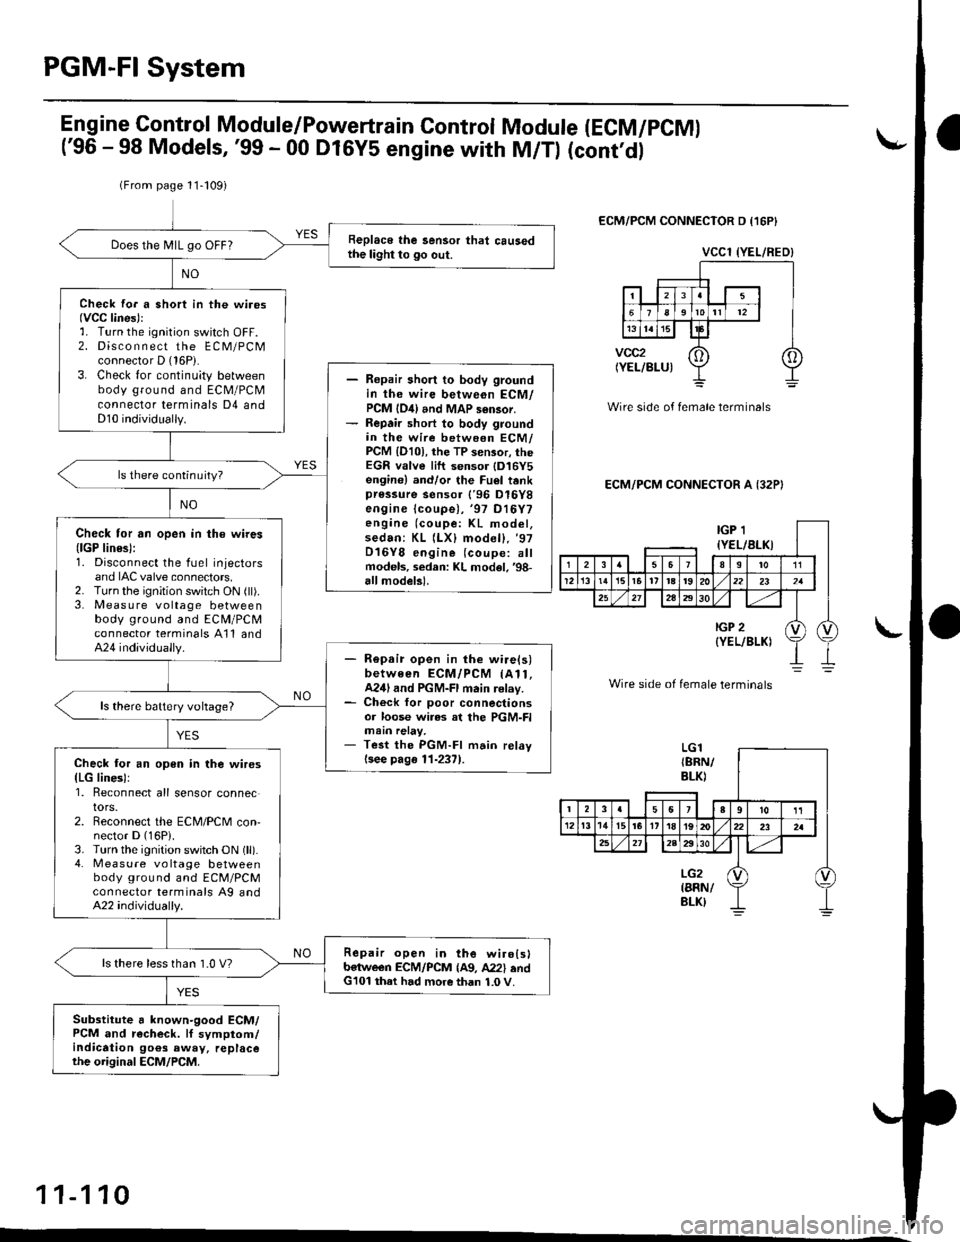 HONDA CIVIC 1997 6.G Workshop Manual PGM-FI System
(From page 11-109)
Replace the sensor that causedthe light to go out.Does the N4lL go OFF?
Check fo. a short in the wi.os(VCC lines)::. Turn the ignition switch OFF.2. Disco n n ect the